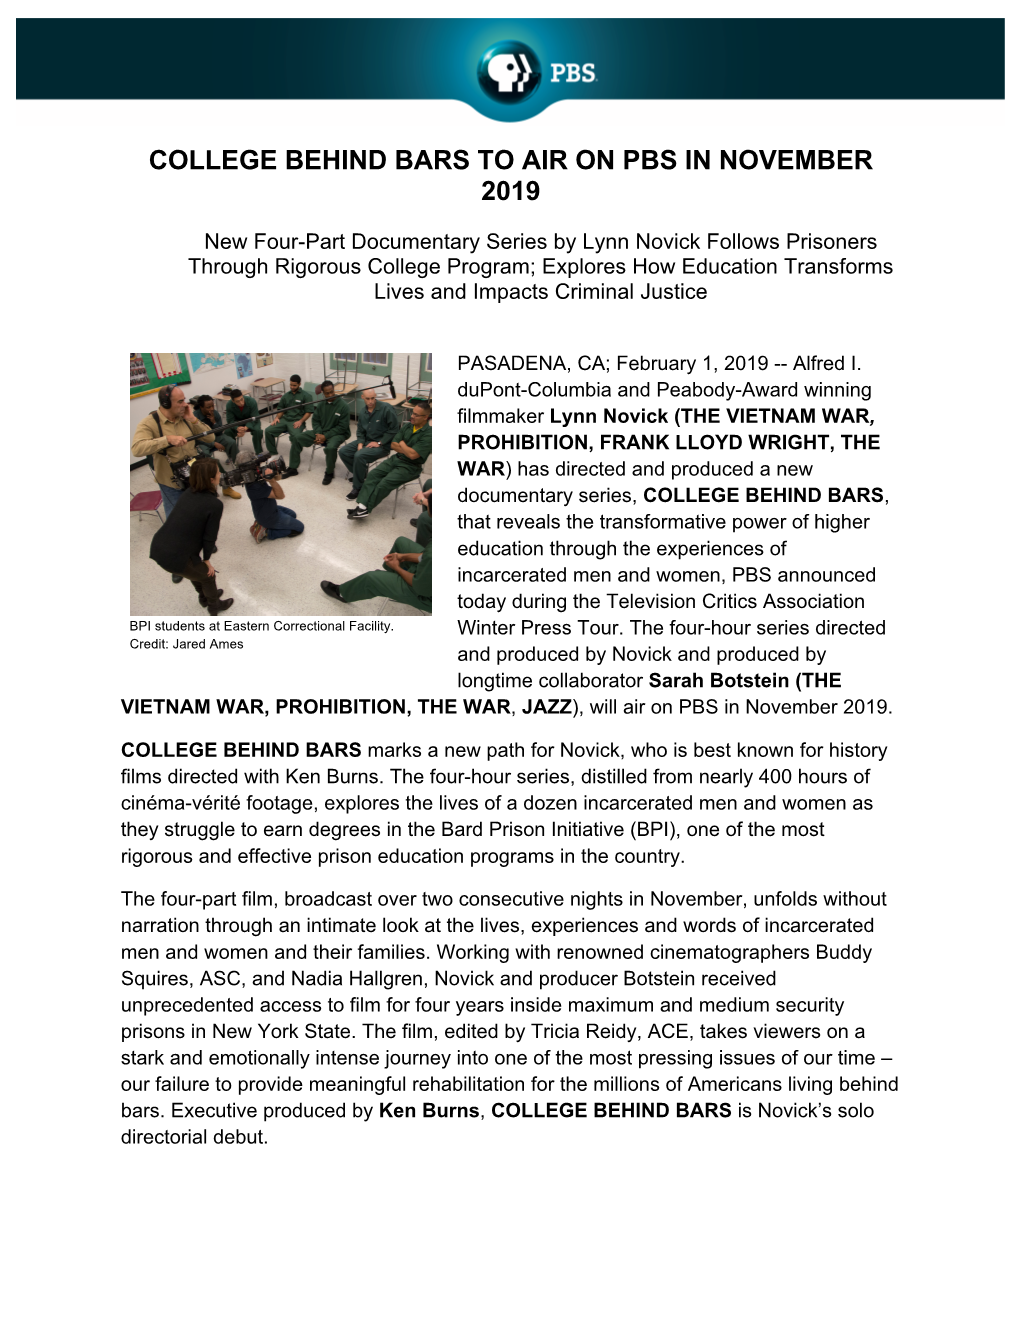 College Behind Bars to Air on Pbs in November 2019